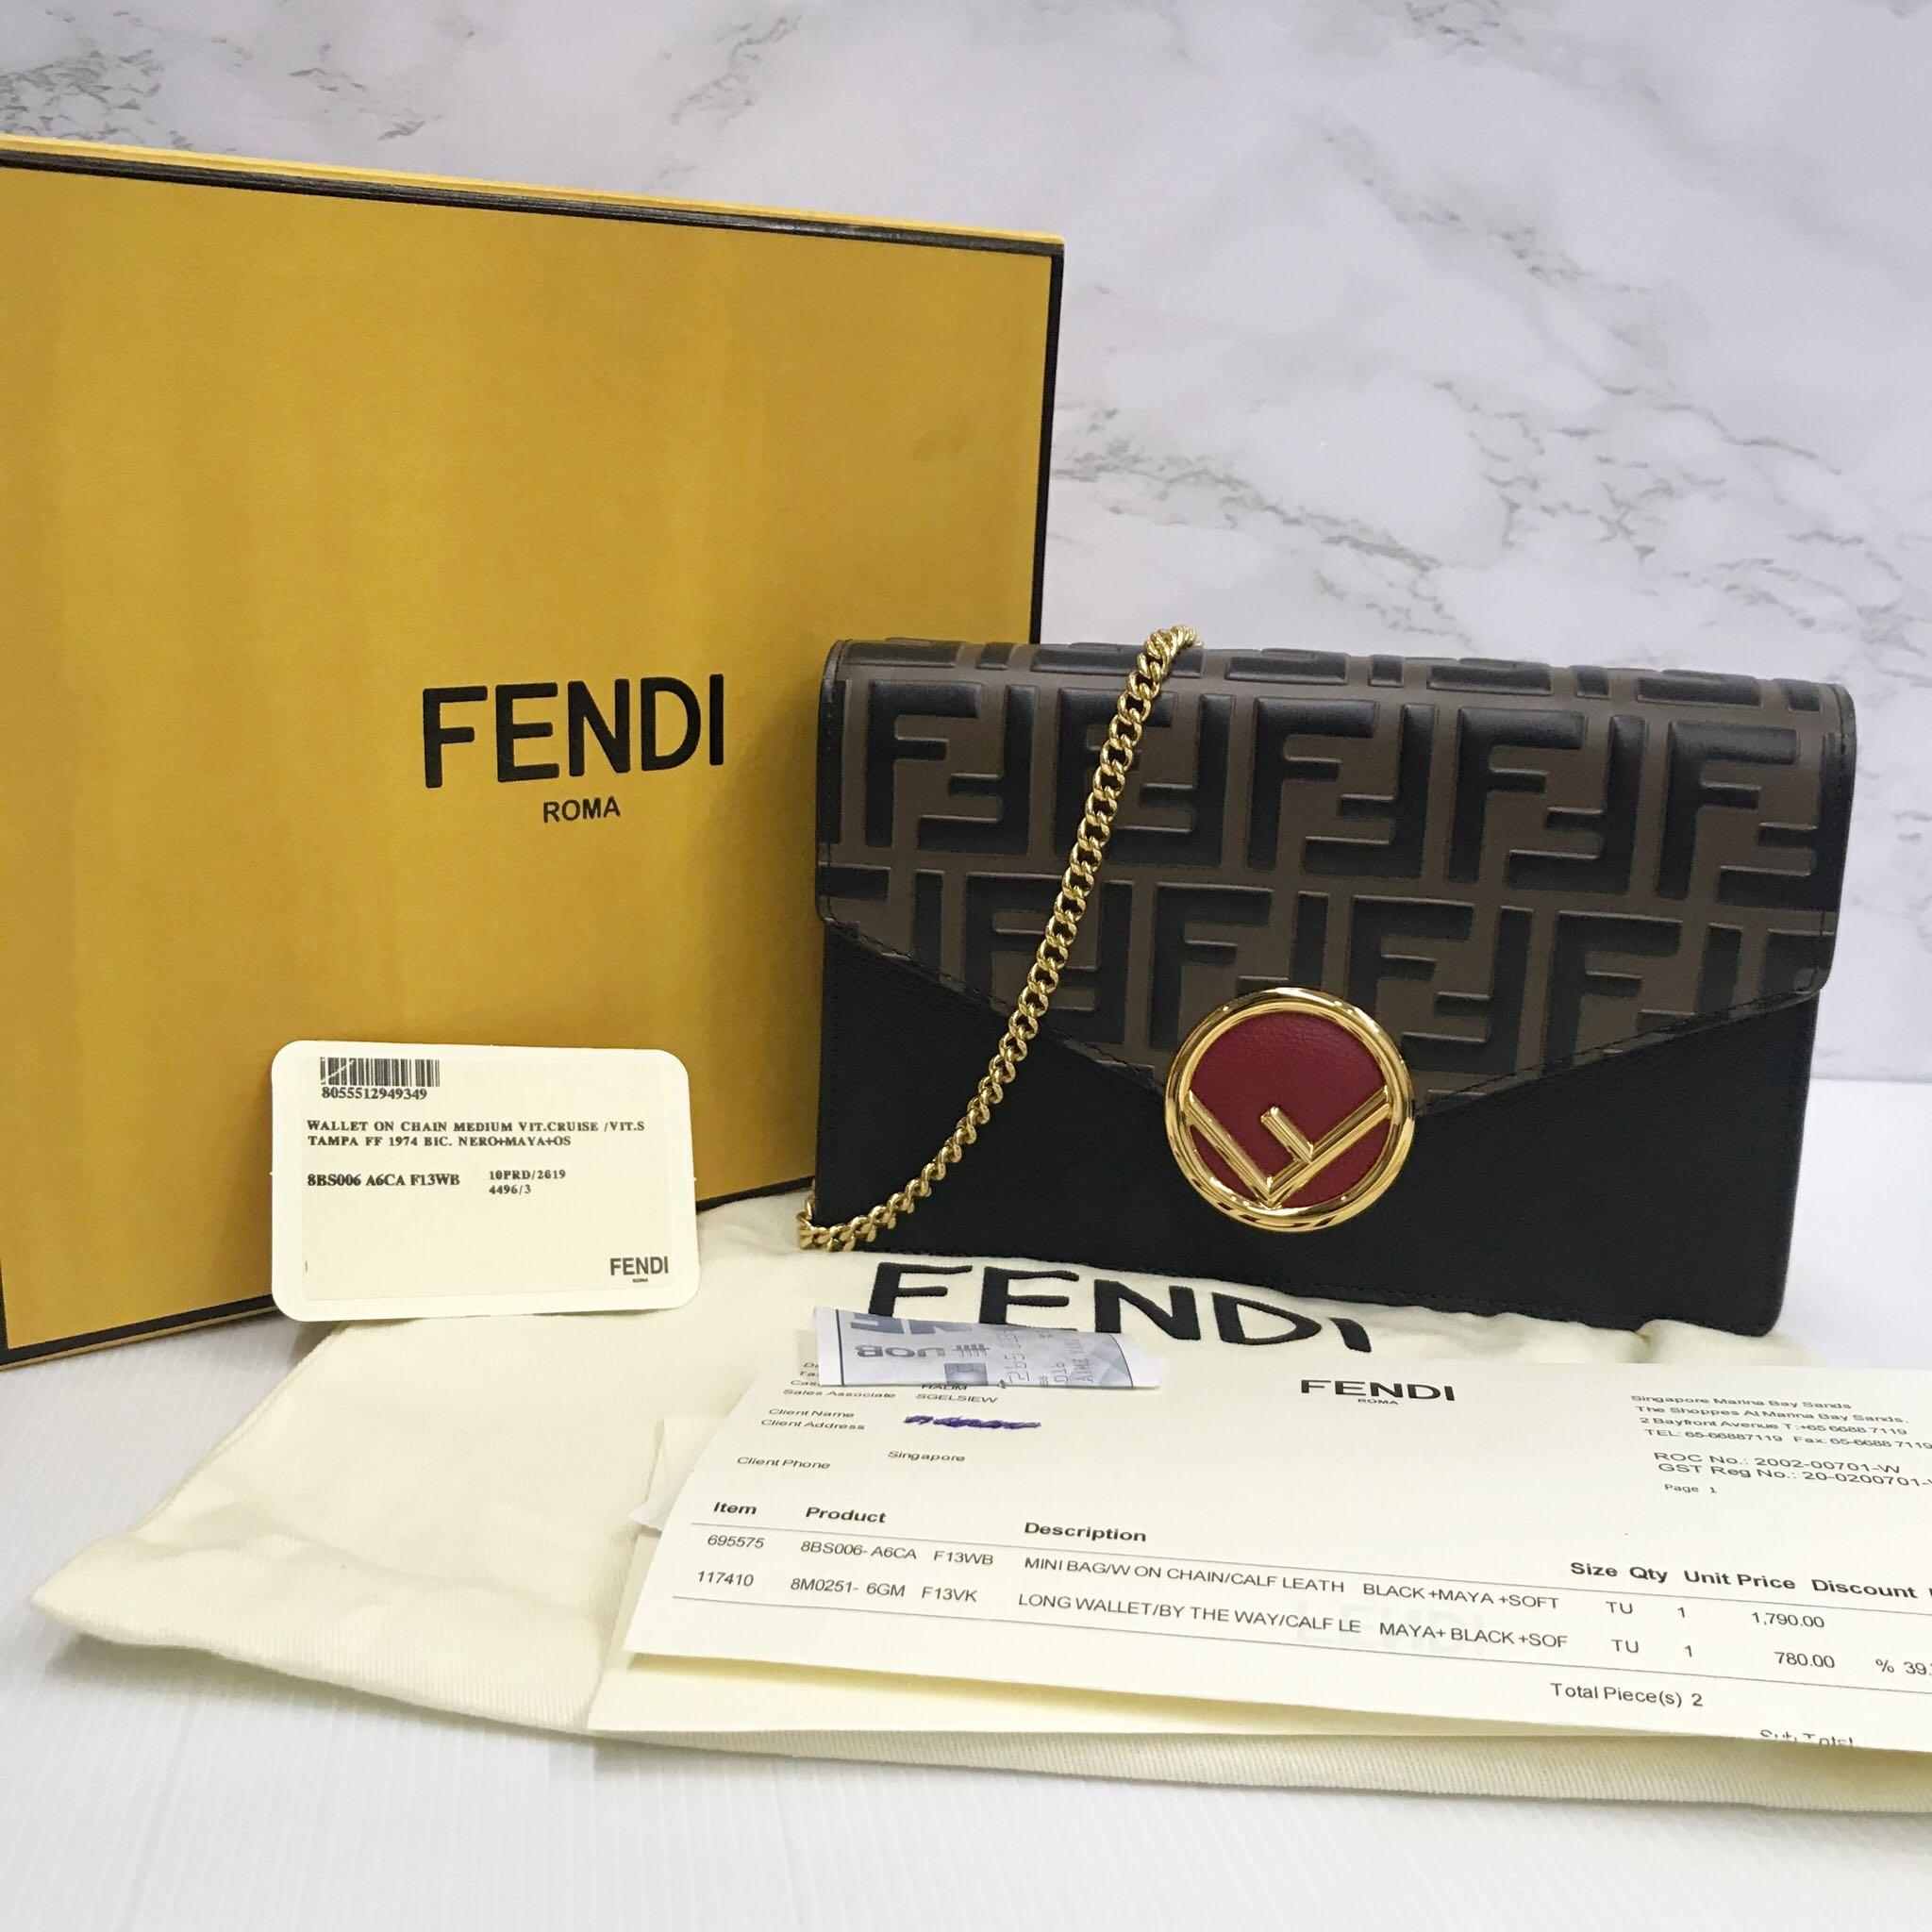 Cross body bags Fendi - Wallet On Chain bag in red with brown FF -  8BS006AAIIF13QI